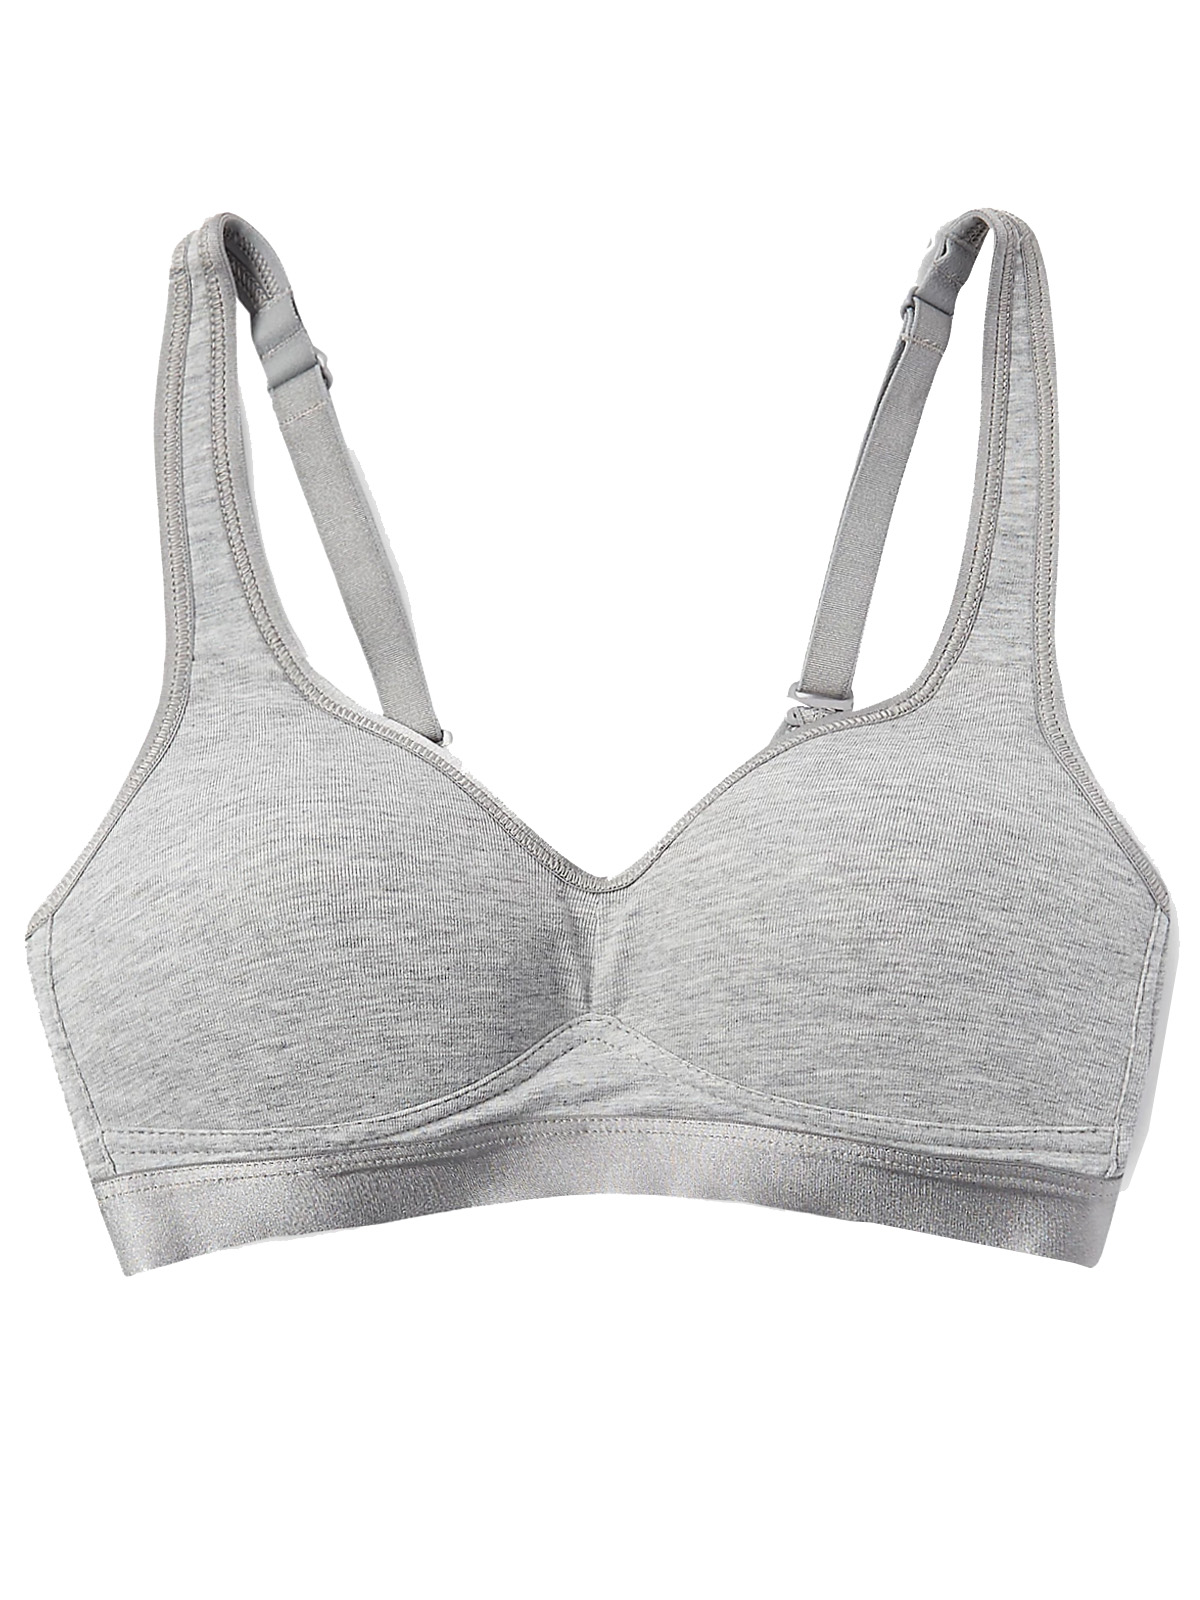  - - GREY-MARL Non-Wired First Sports Bra - Size 30 to 34 (AA-B)